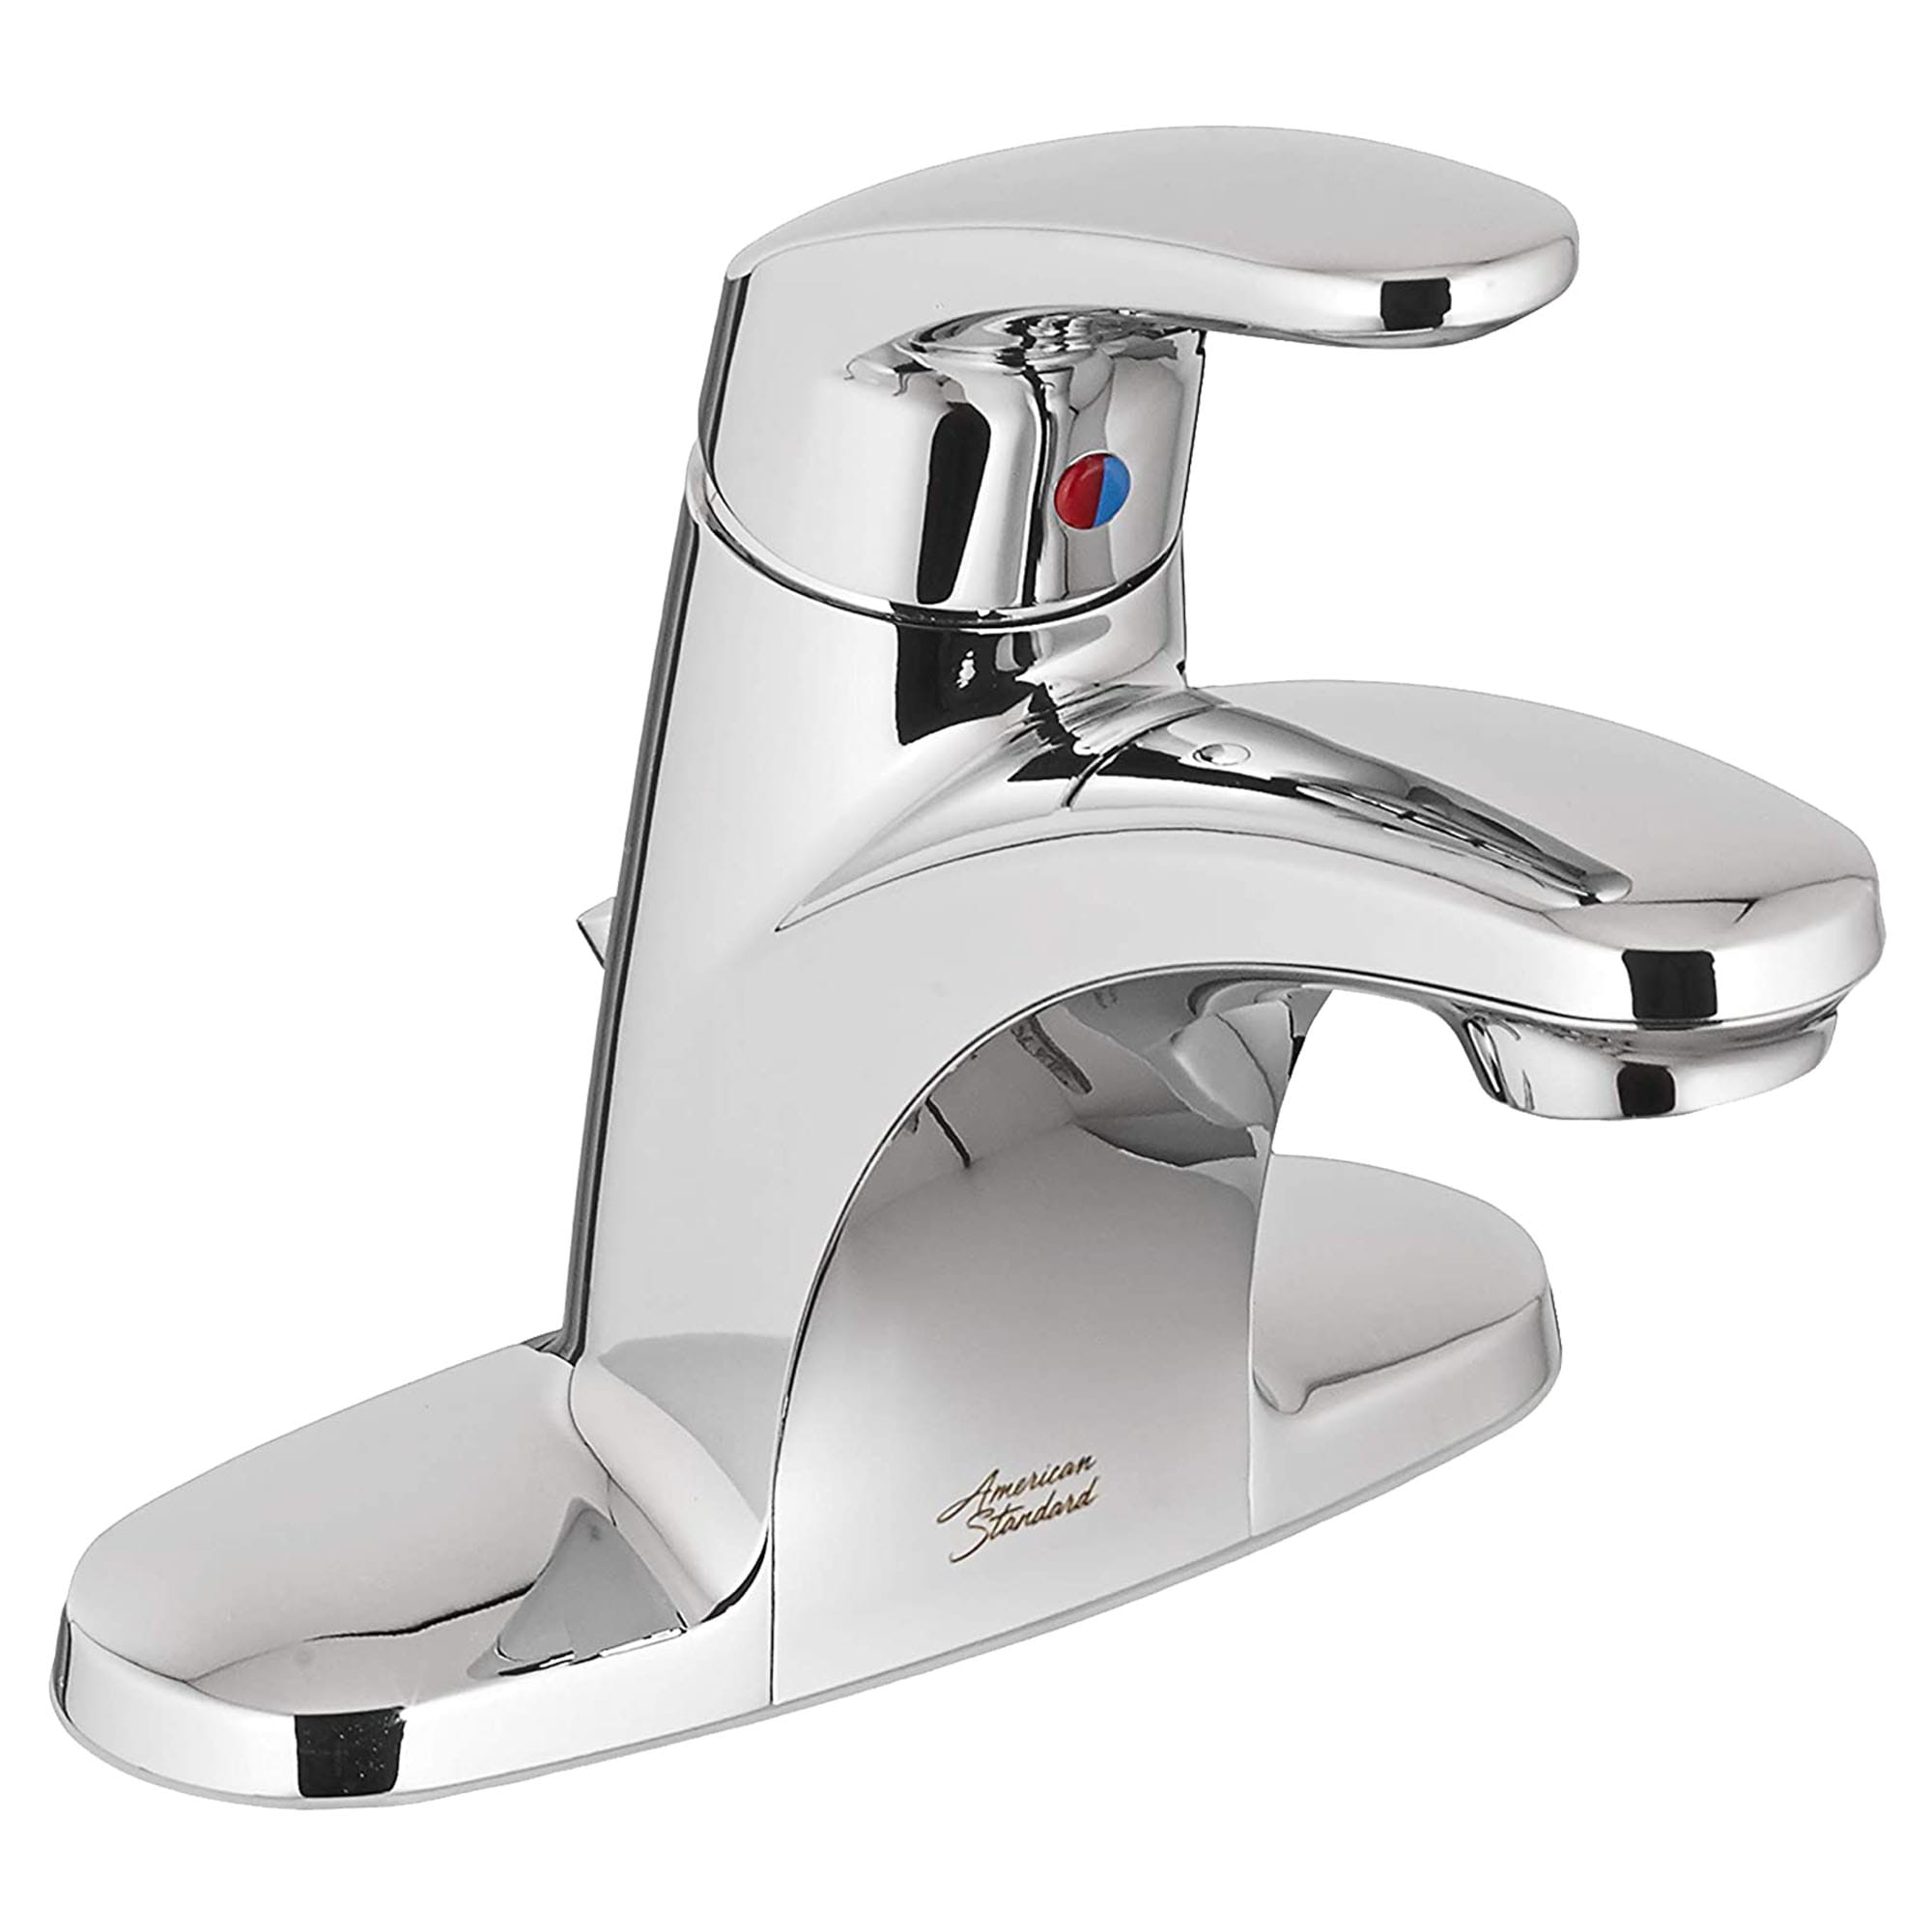 American Standard 7420.201.224 Portsmouth Centerset Lavatory Faucet with Speed Connect Drain with Lever Handles Crescent Spout Oil Rubbed Bronze 